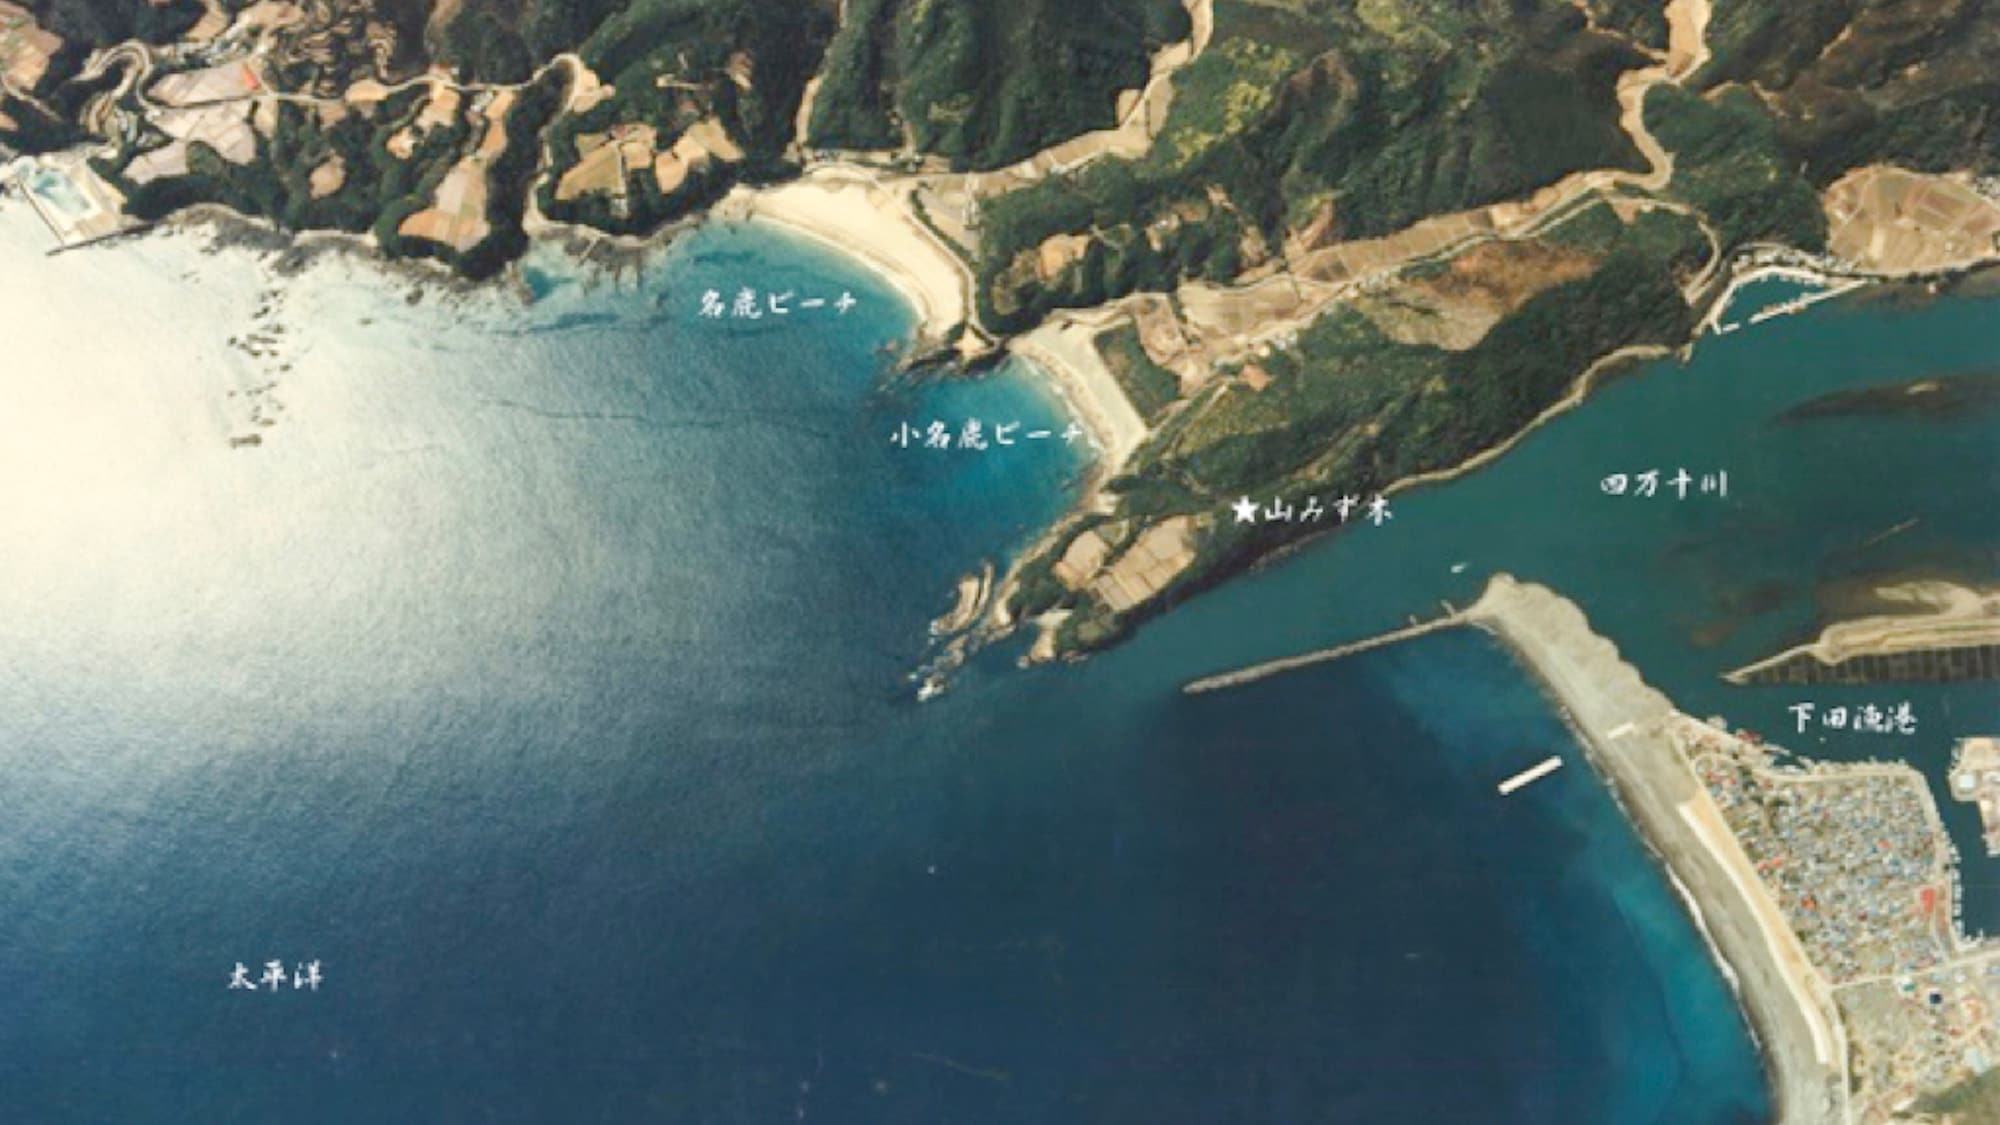 ・[MAP] An unexplored area with untouched nature. Our facility is located on a cliff at the mouth of the Shimanto River, where it flows into the Pacific Ocean.